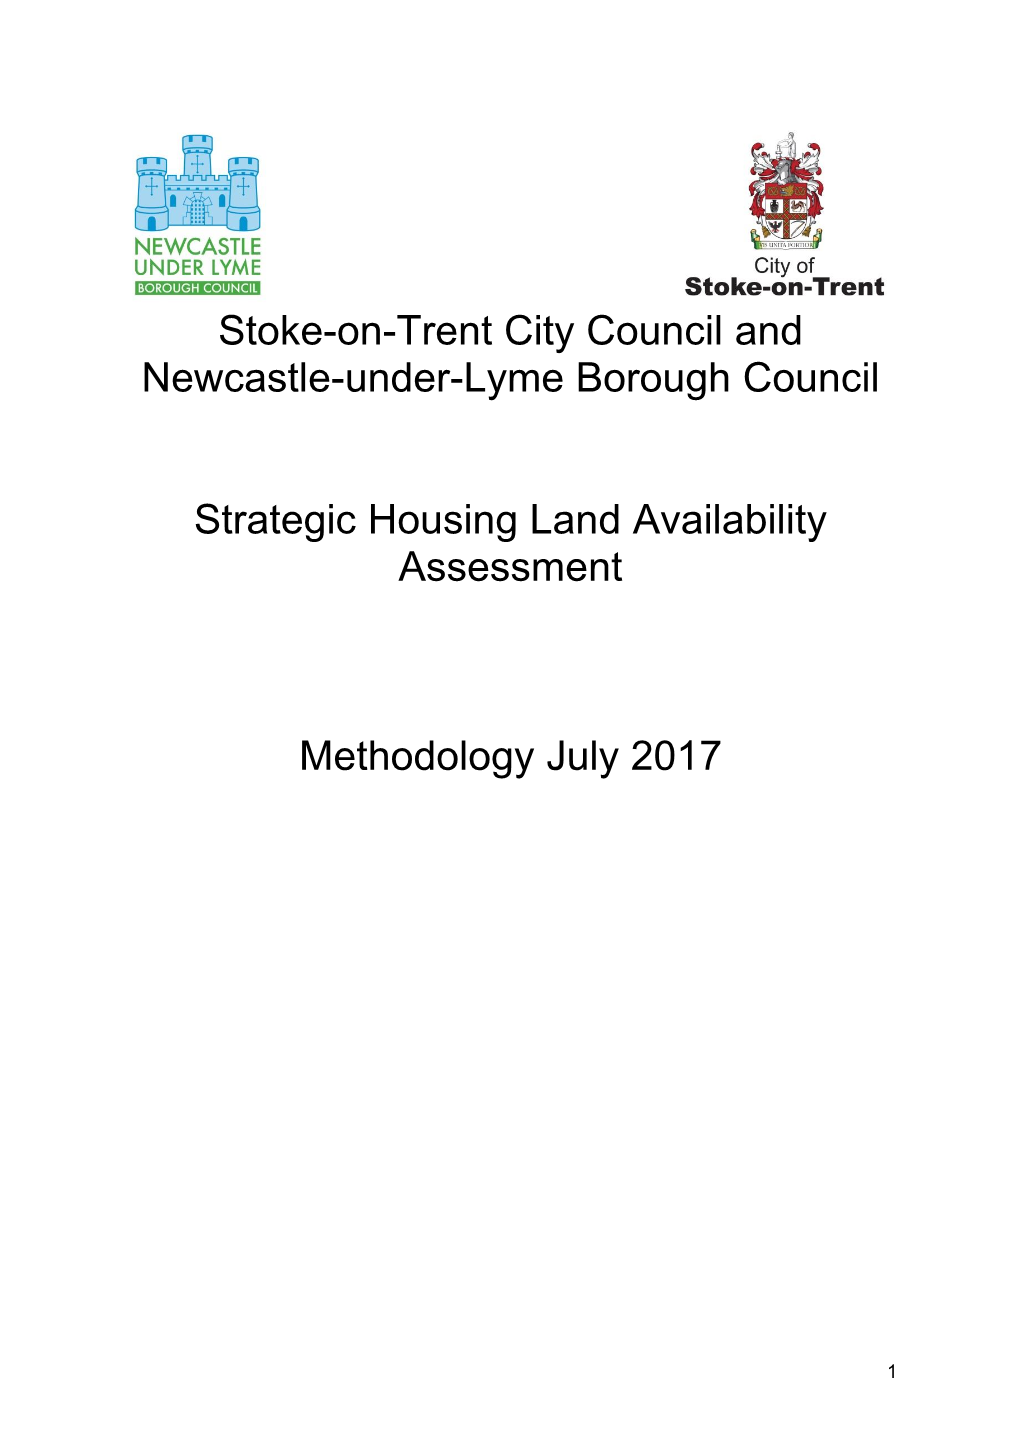 Stoke-On-Trent City Council and Newcastle-Under-Lyme Borough Council